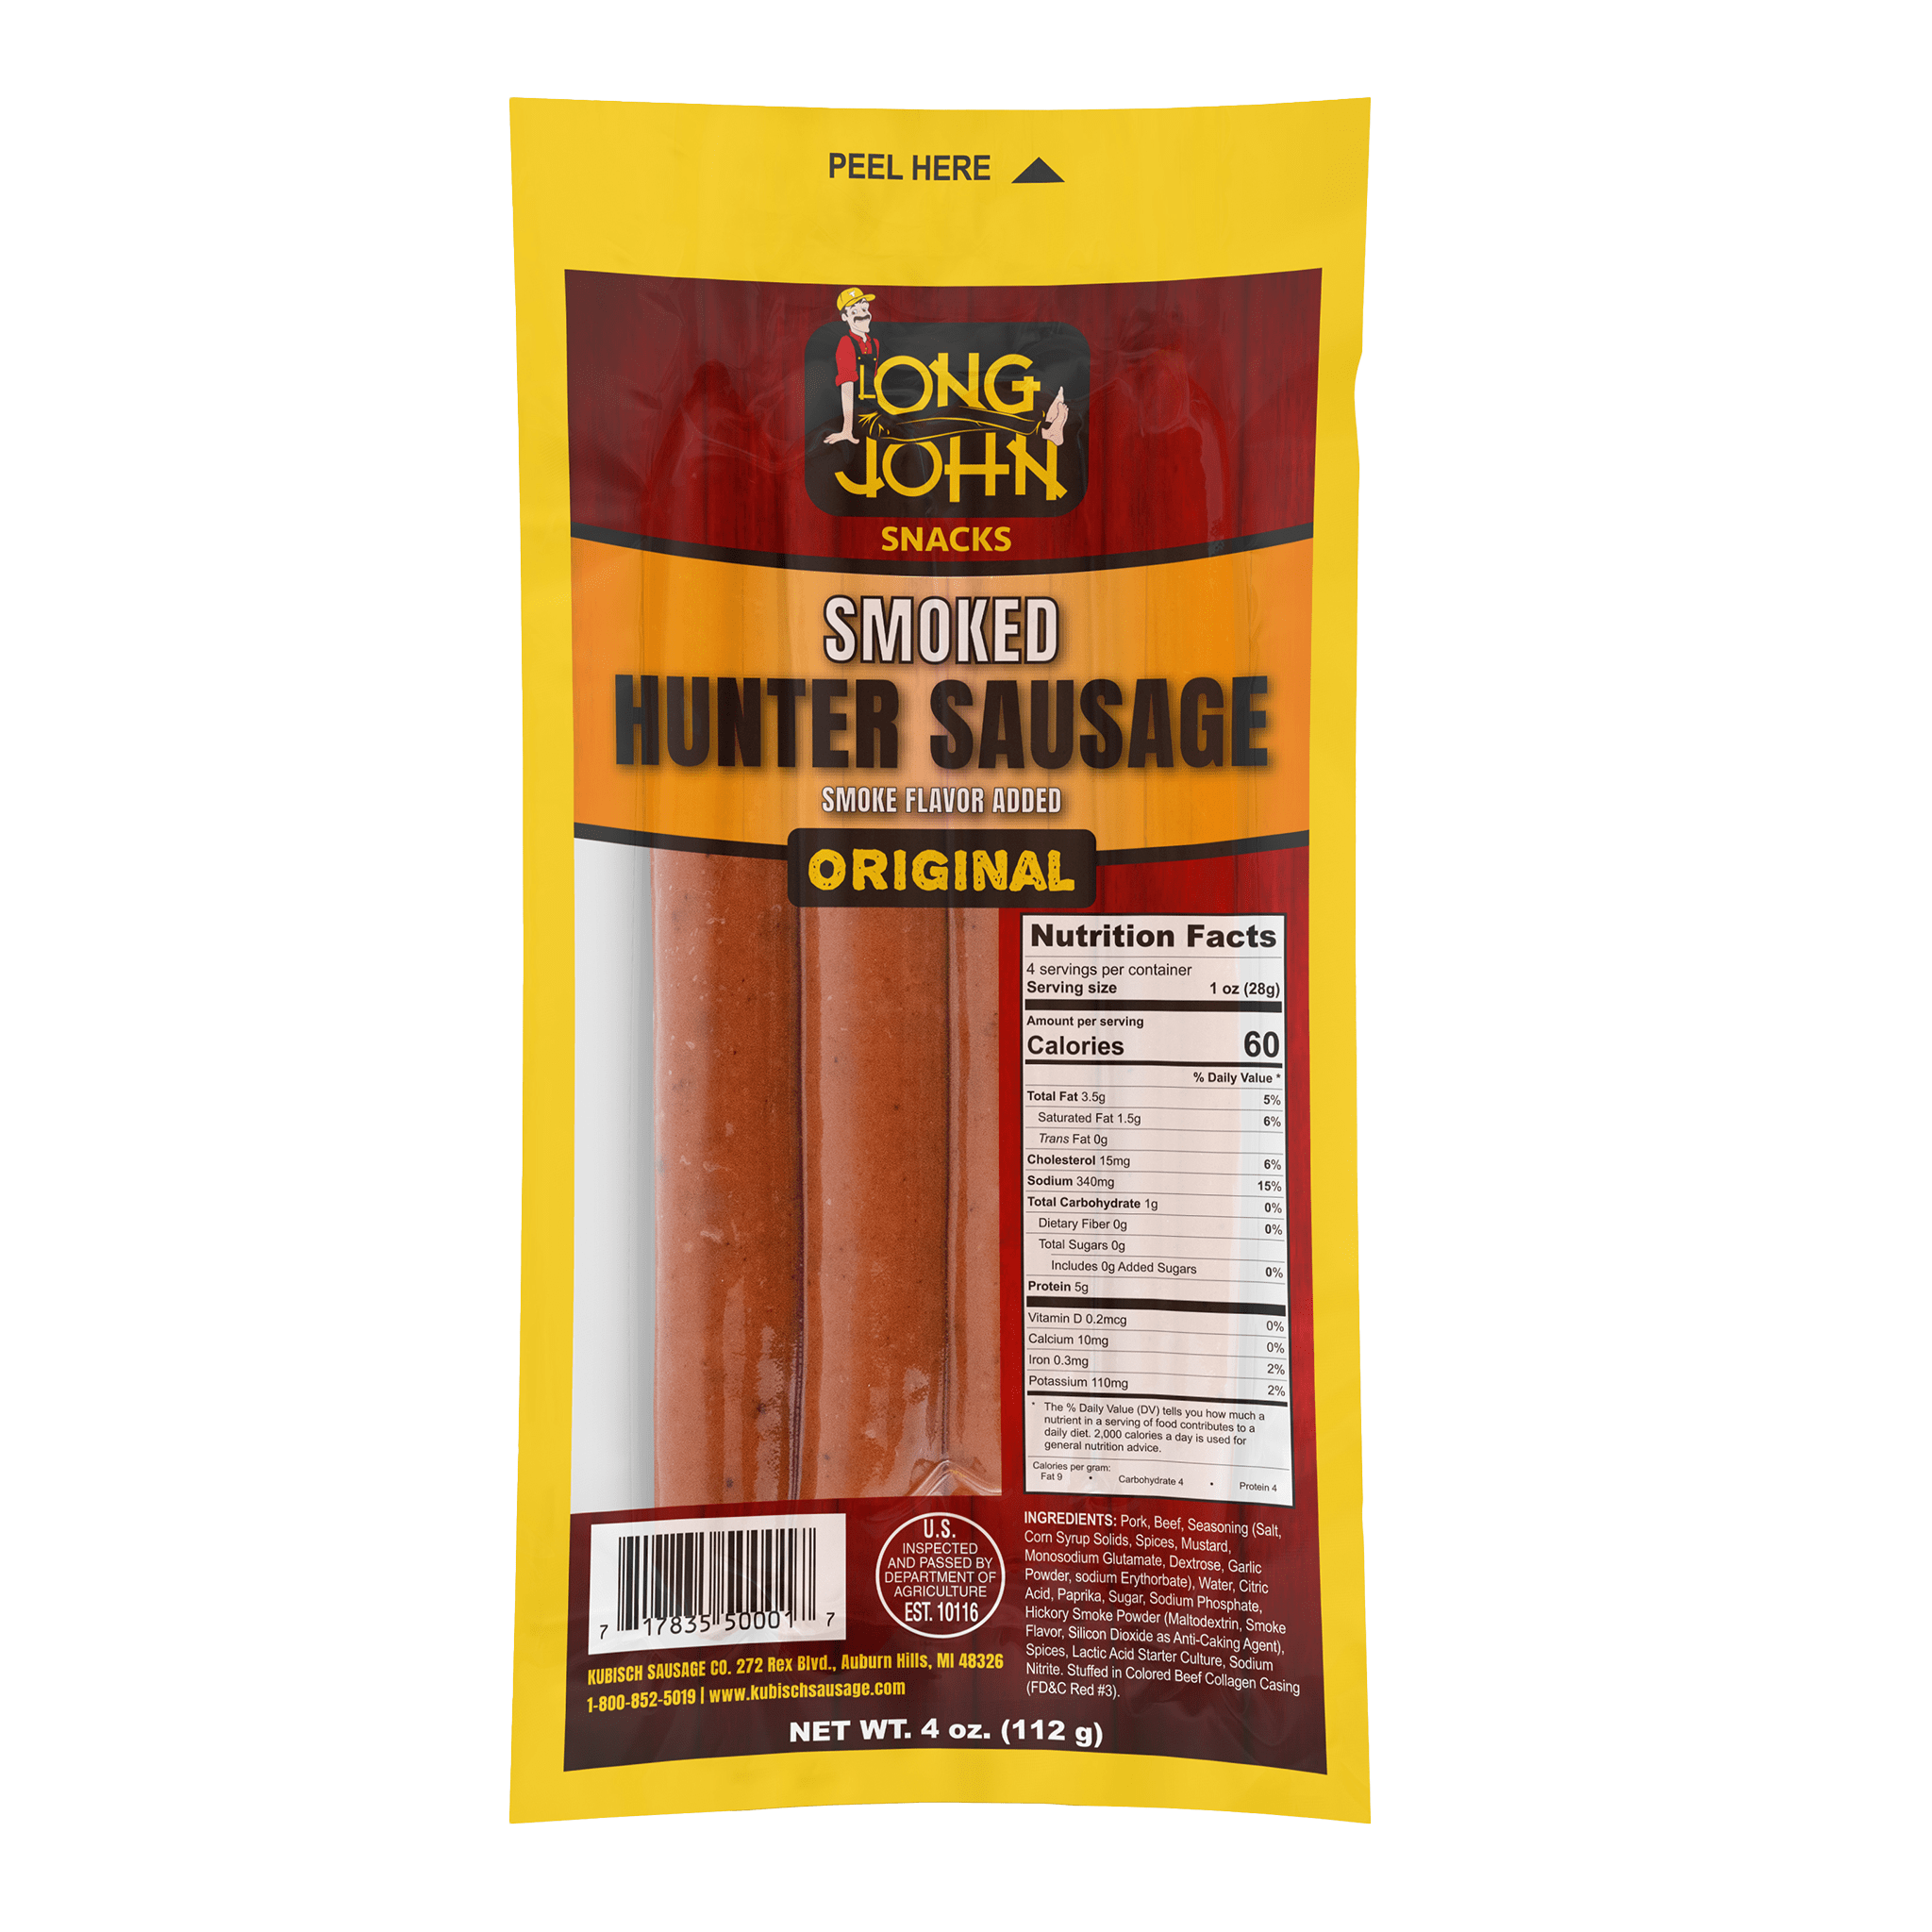 Load image into Gallery viewer, Original Smoked Hunters Sausage back of package.
